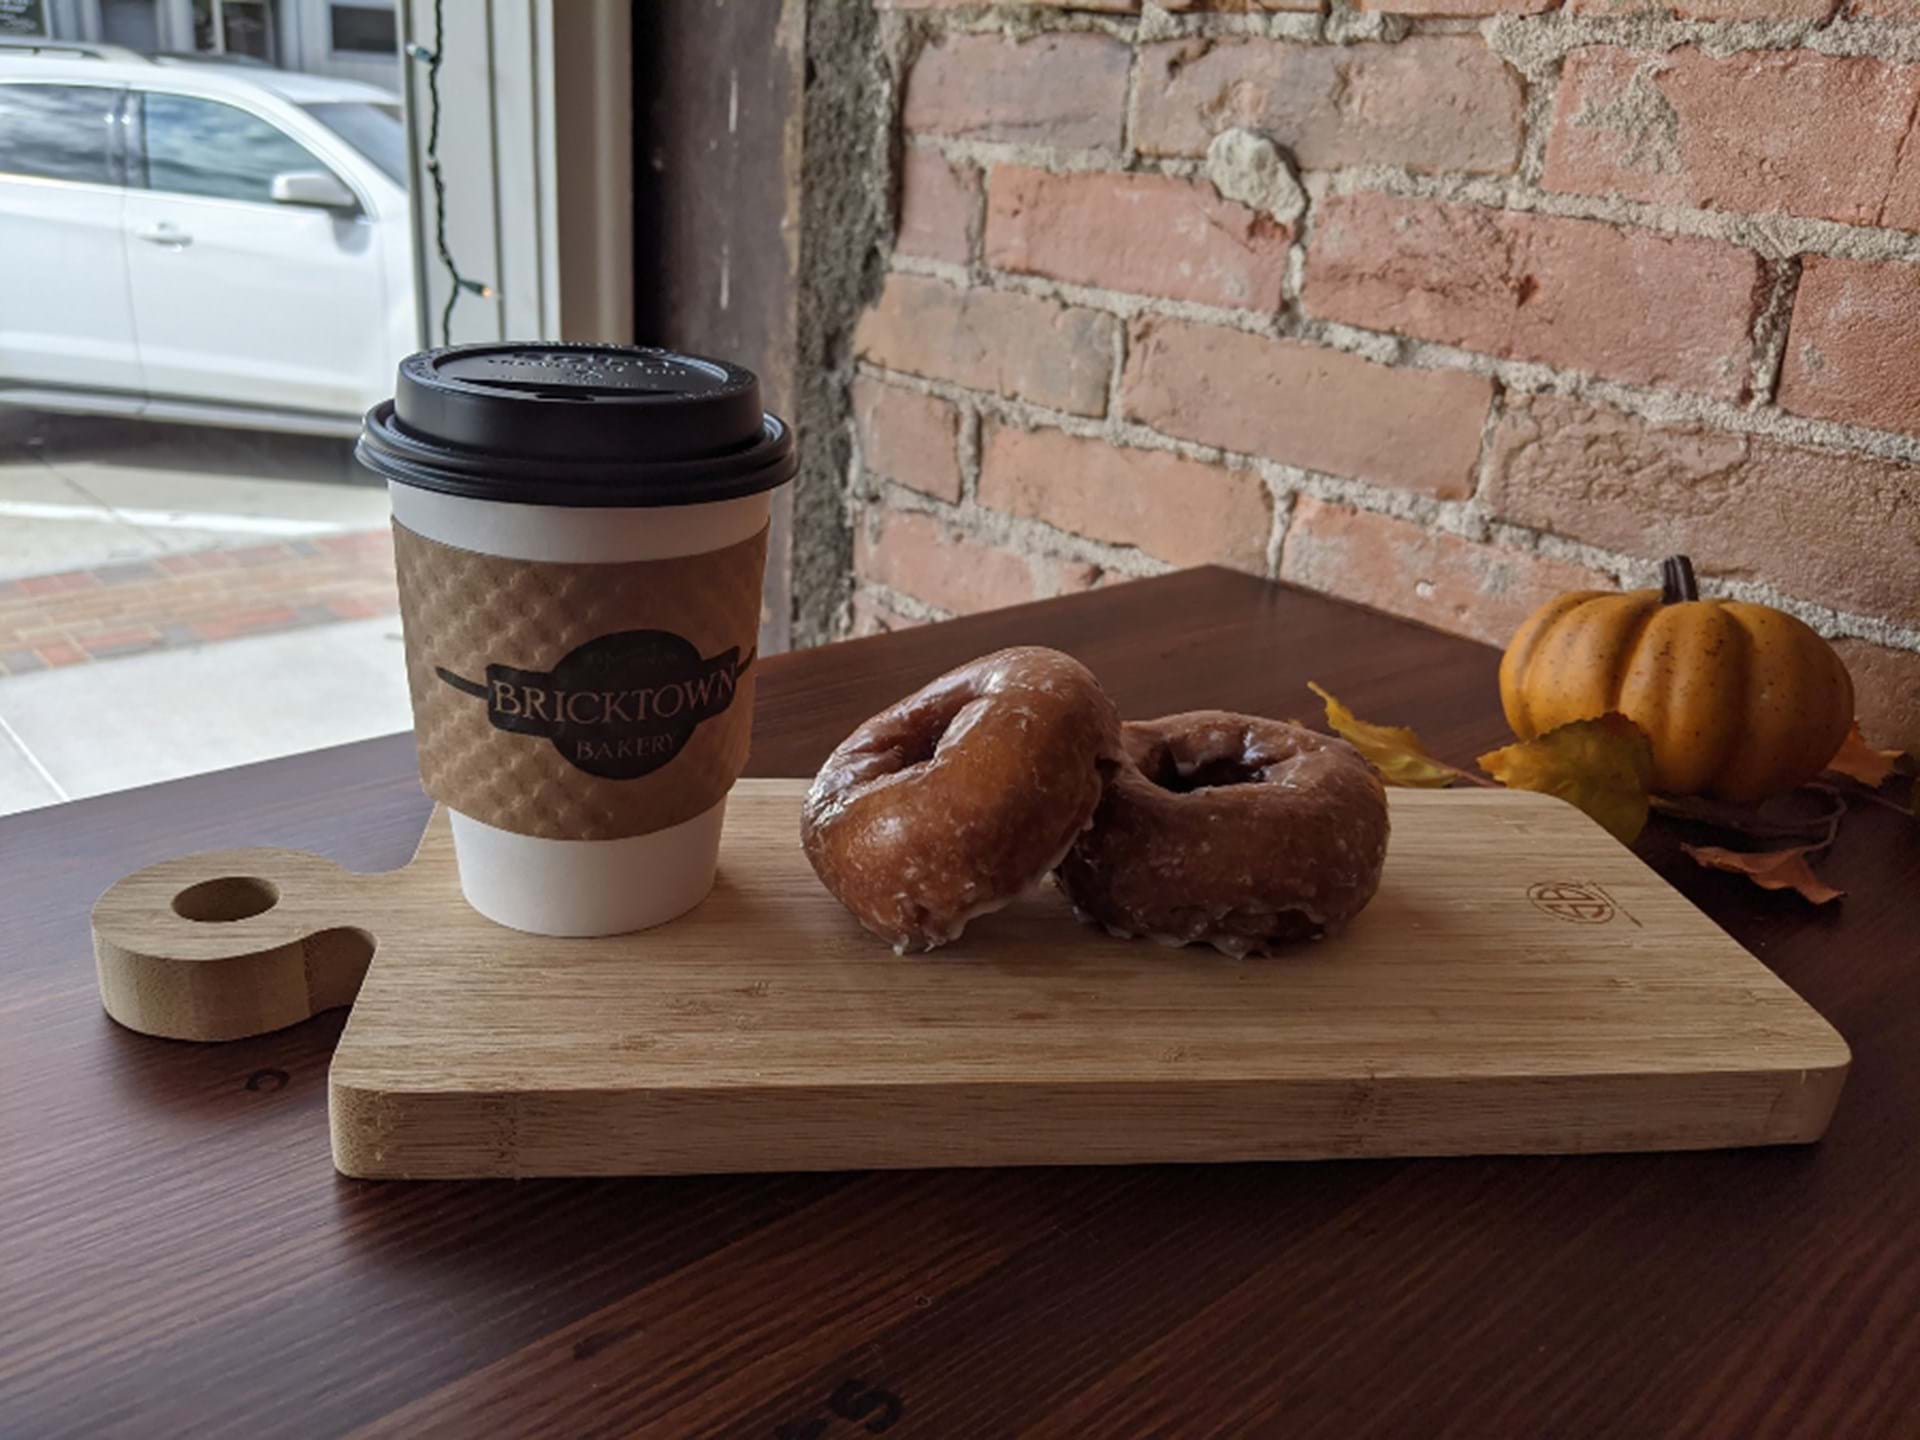 Coffee and Donuts at Bricktown Bakery in Nevada, IA